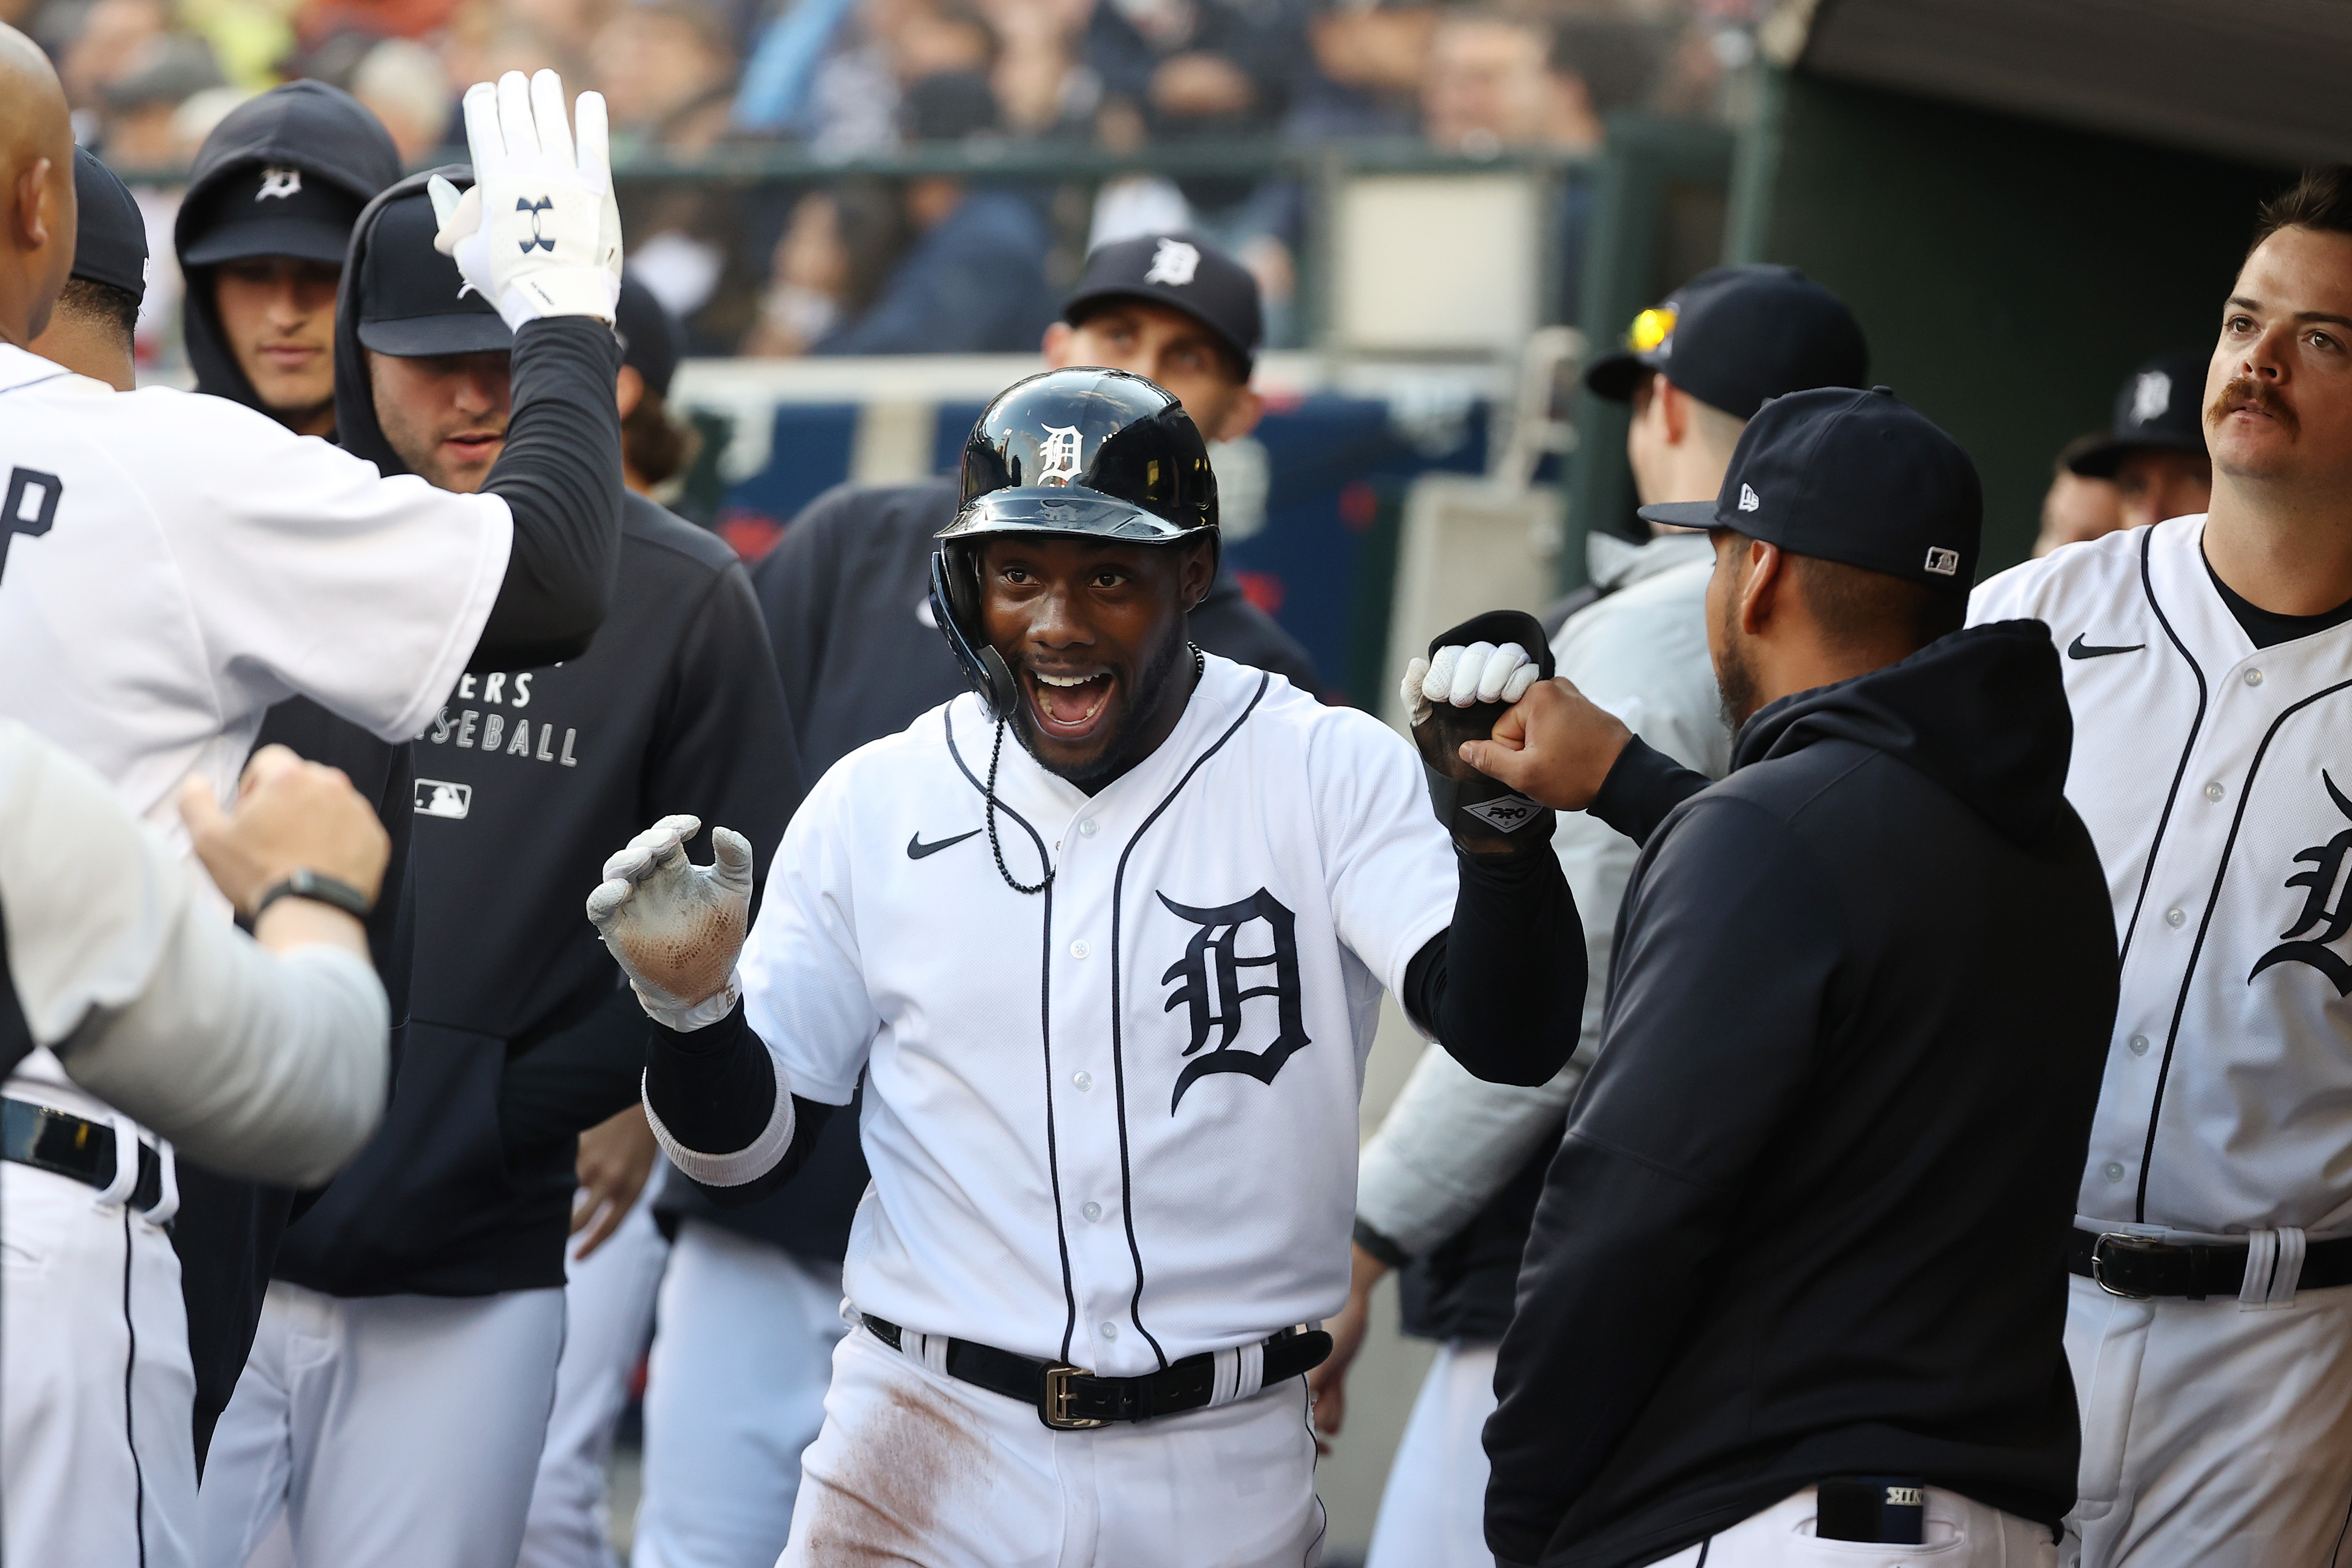 Detroit Tigers will play full regular season schedule as part of